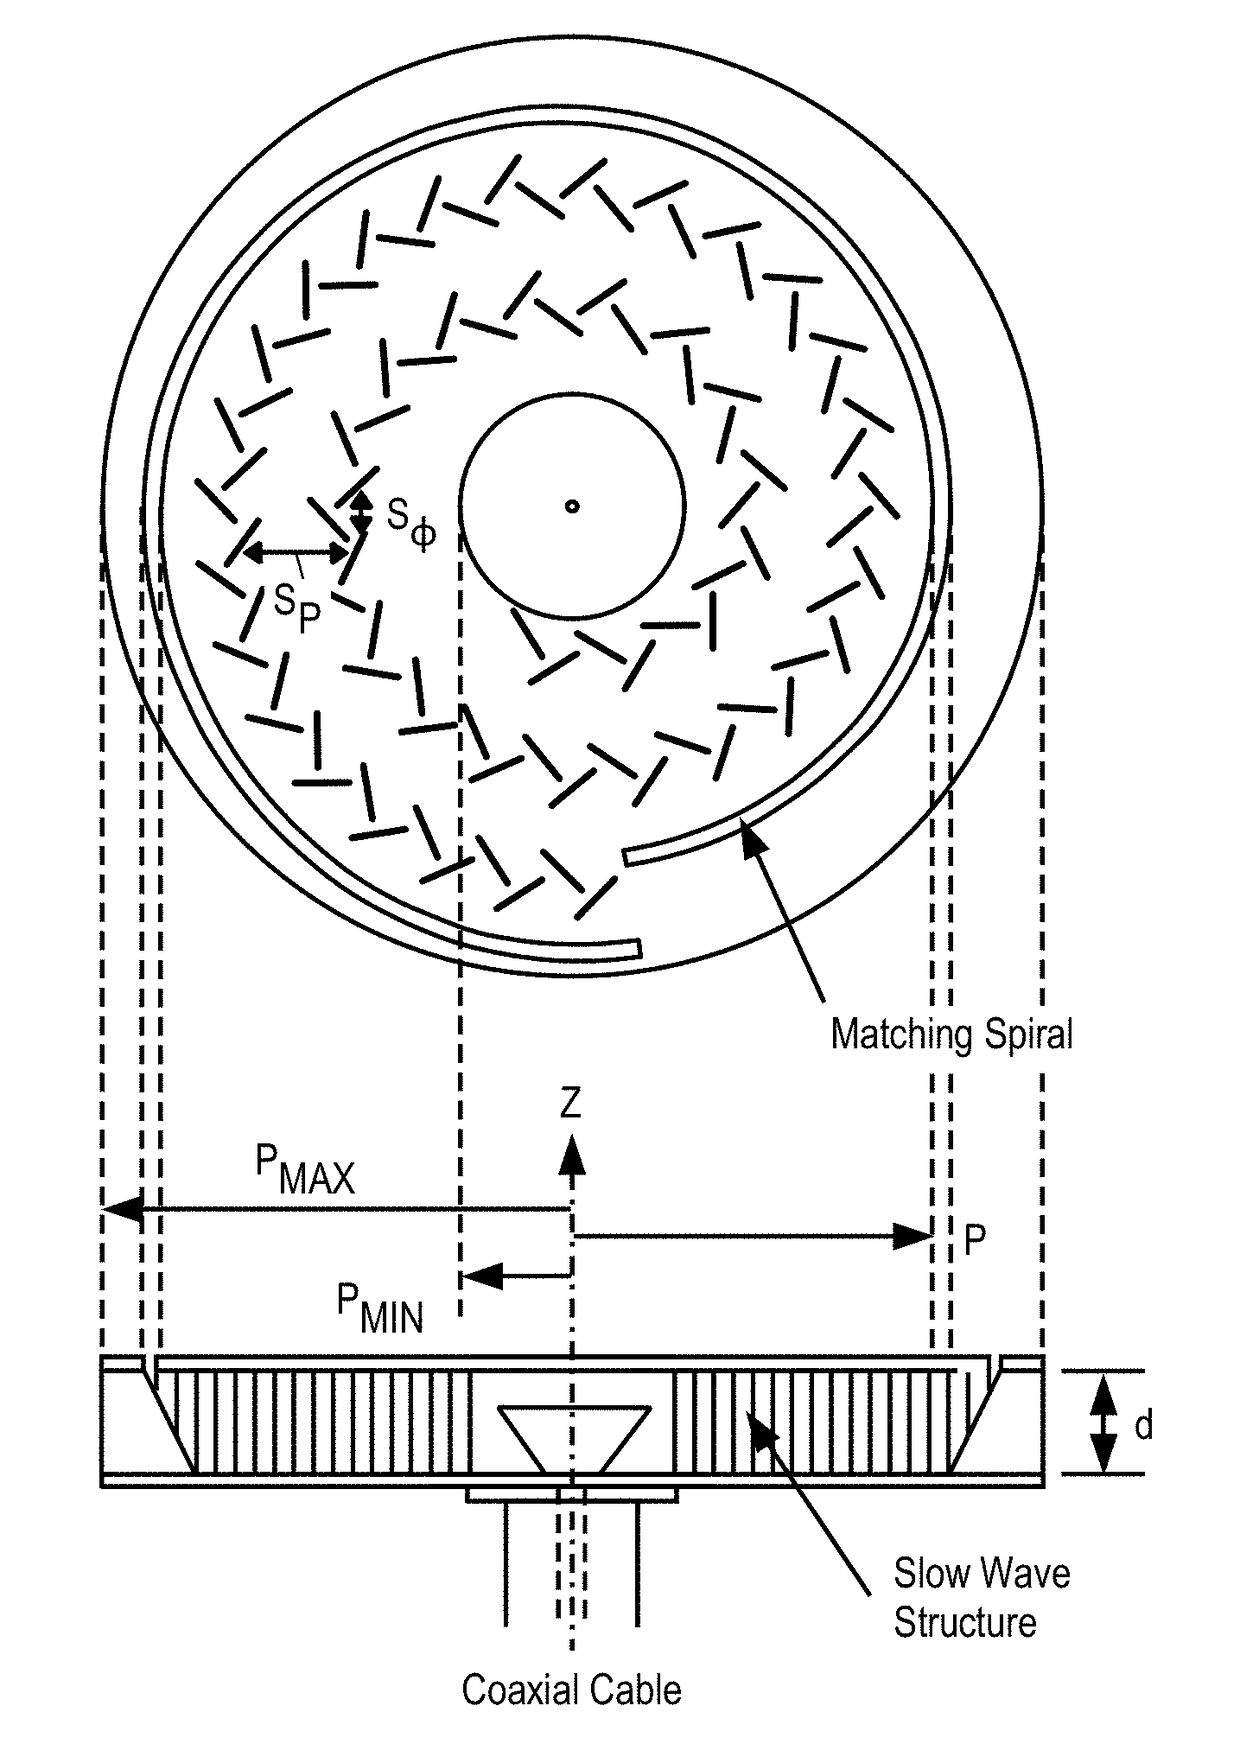 Antenna aperture with clamping mechanism